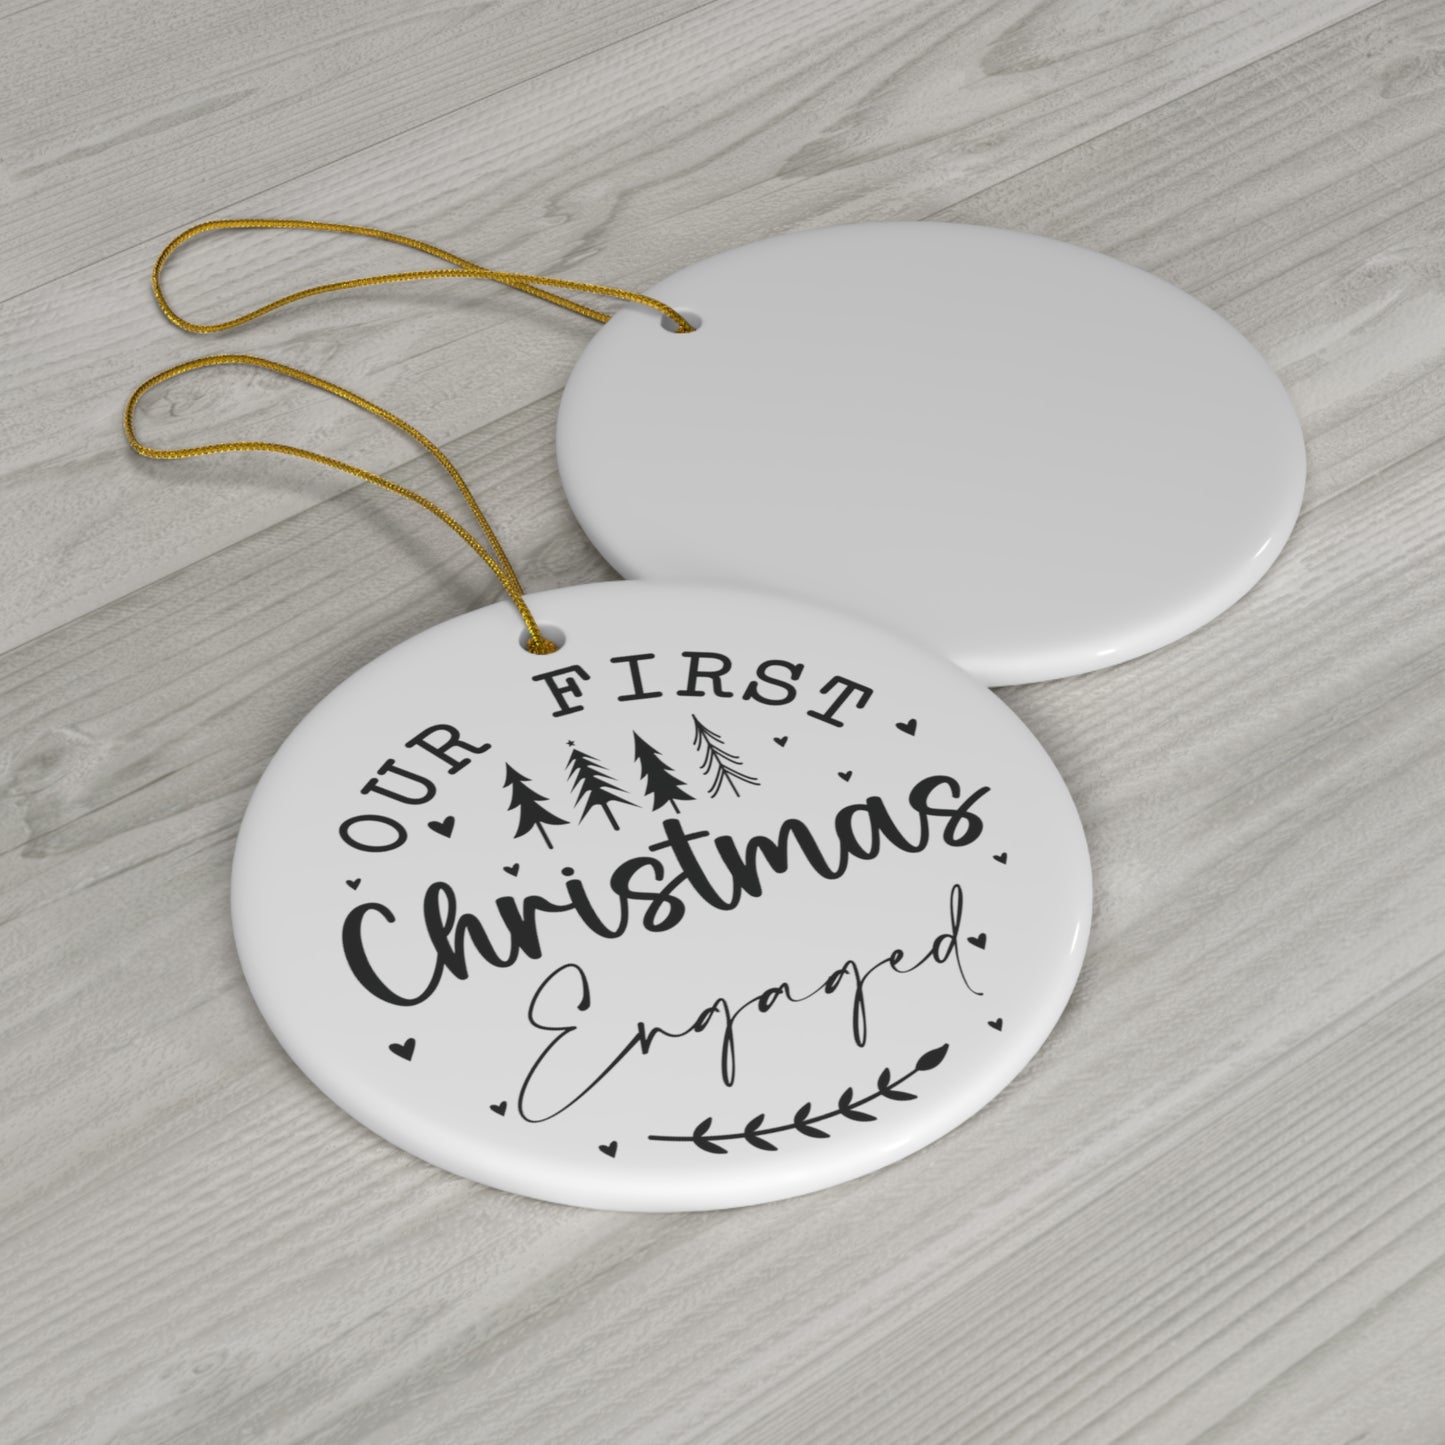 Our First Christmas Engaged Ceramic Ornament